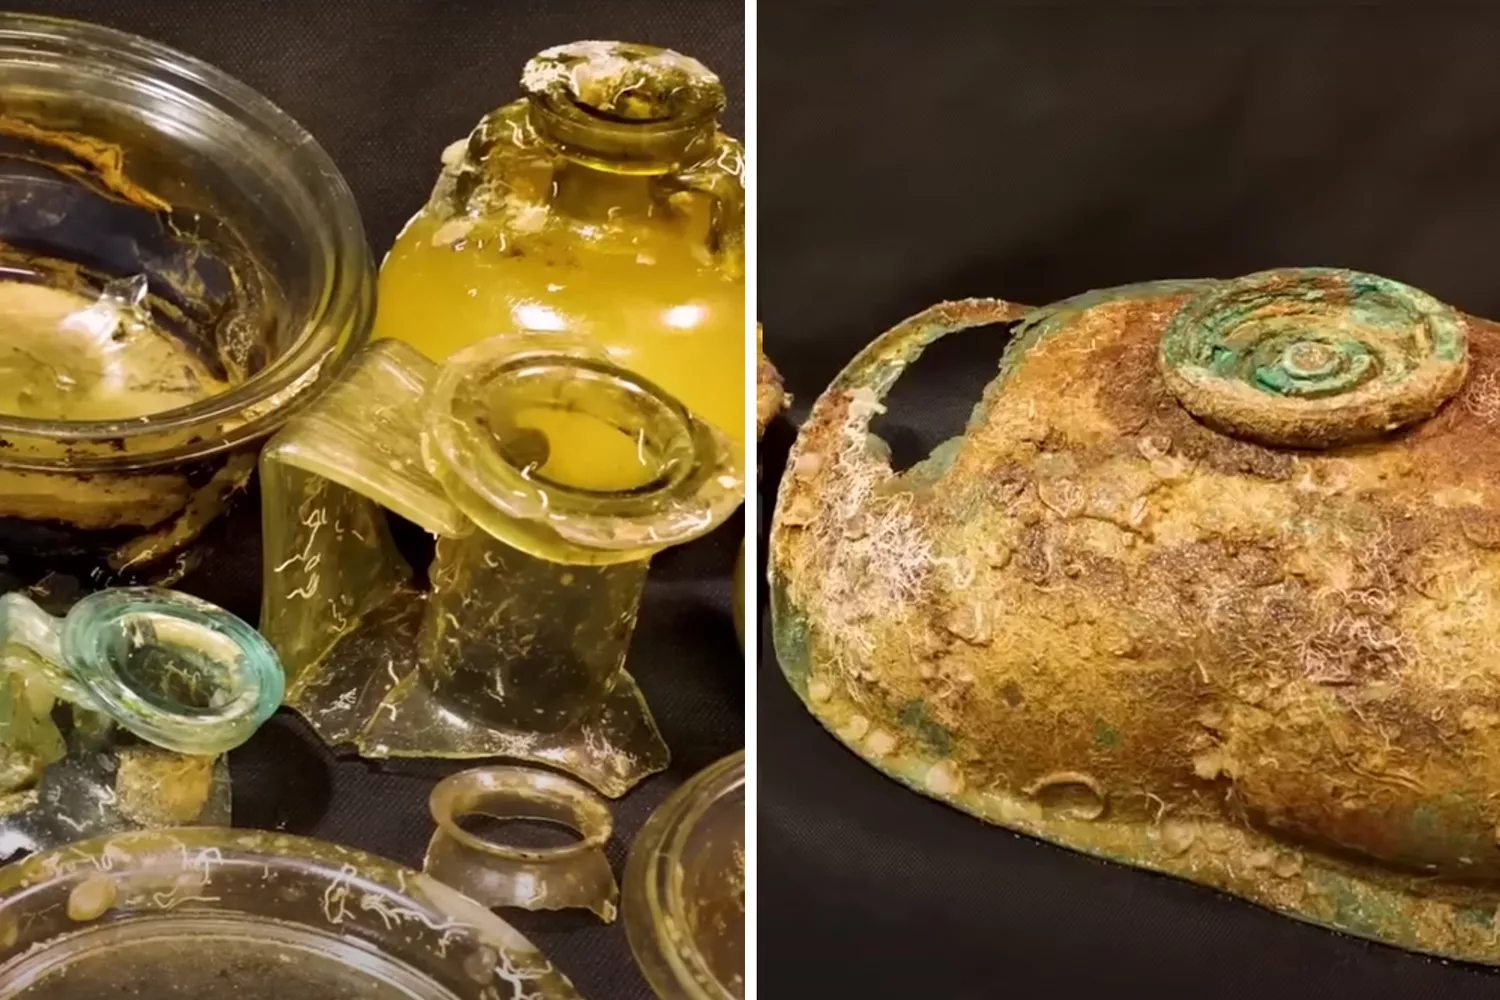 Rare Glassware Was Just Recovered From a 2,000-Year-Old Shipwreck—Watch the Epic Discovery Here